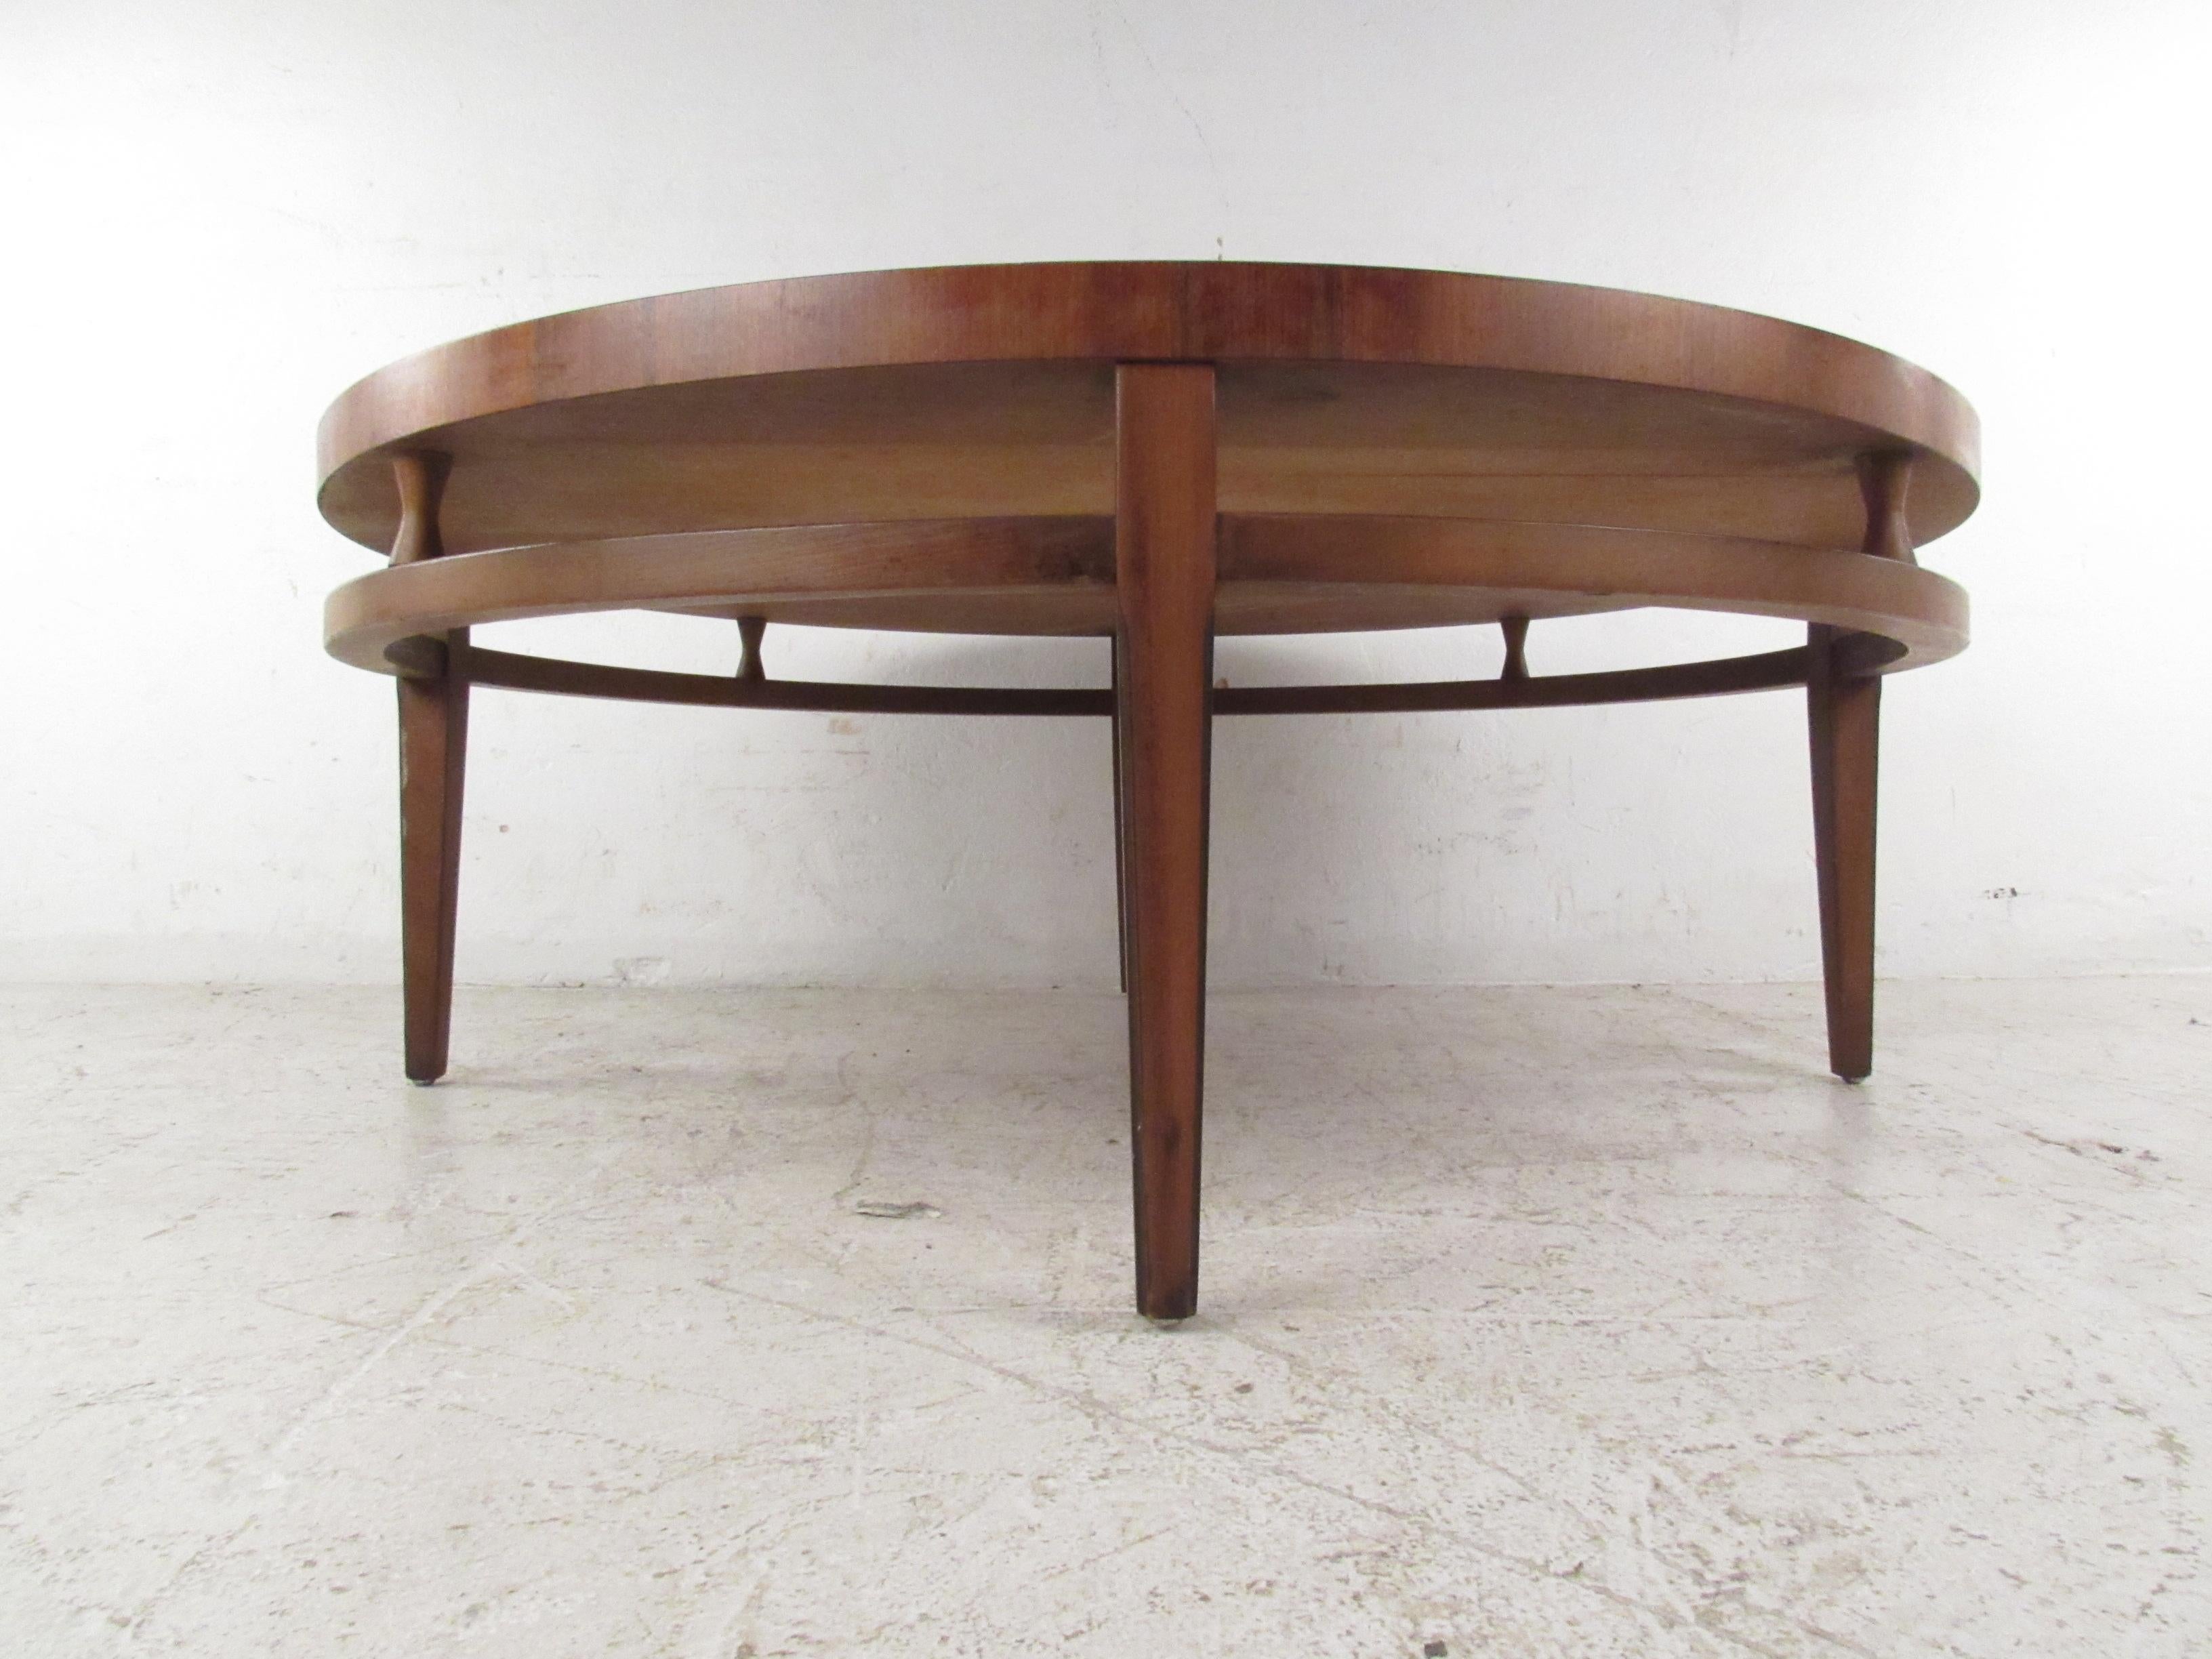 North American Round Mid-Century Modern Coffee Table by Lane Furniture